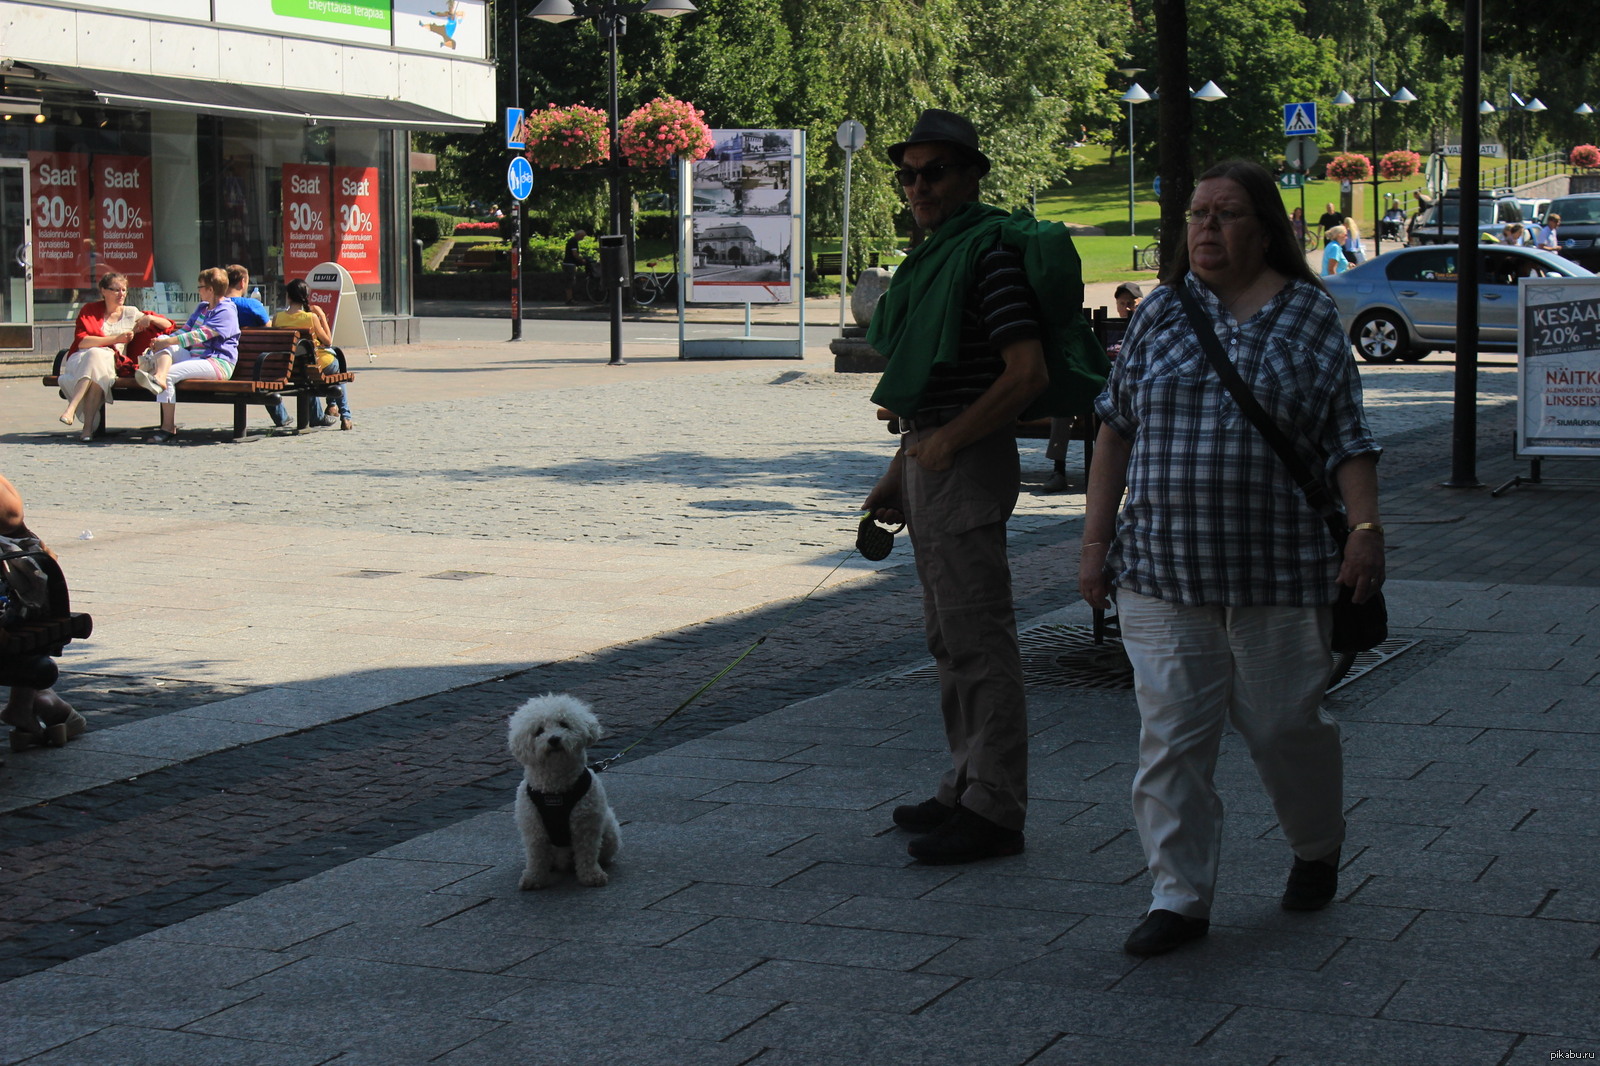 Finland has its own atmosphere - My, Dog, People, Finland, The street, The sun